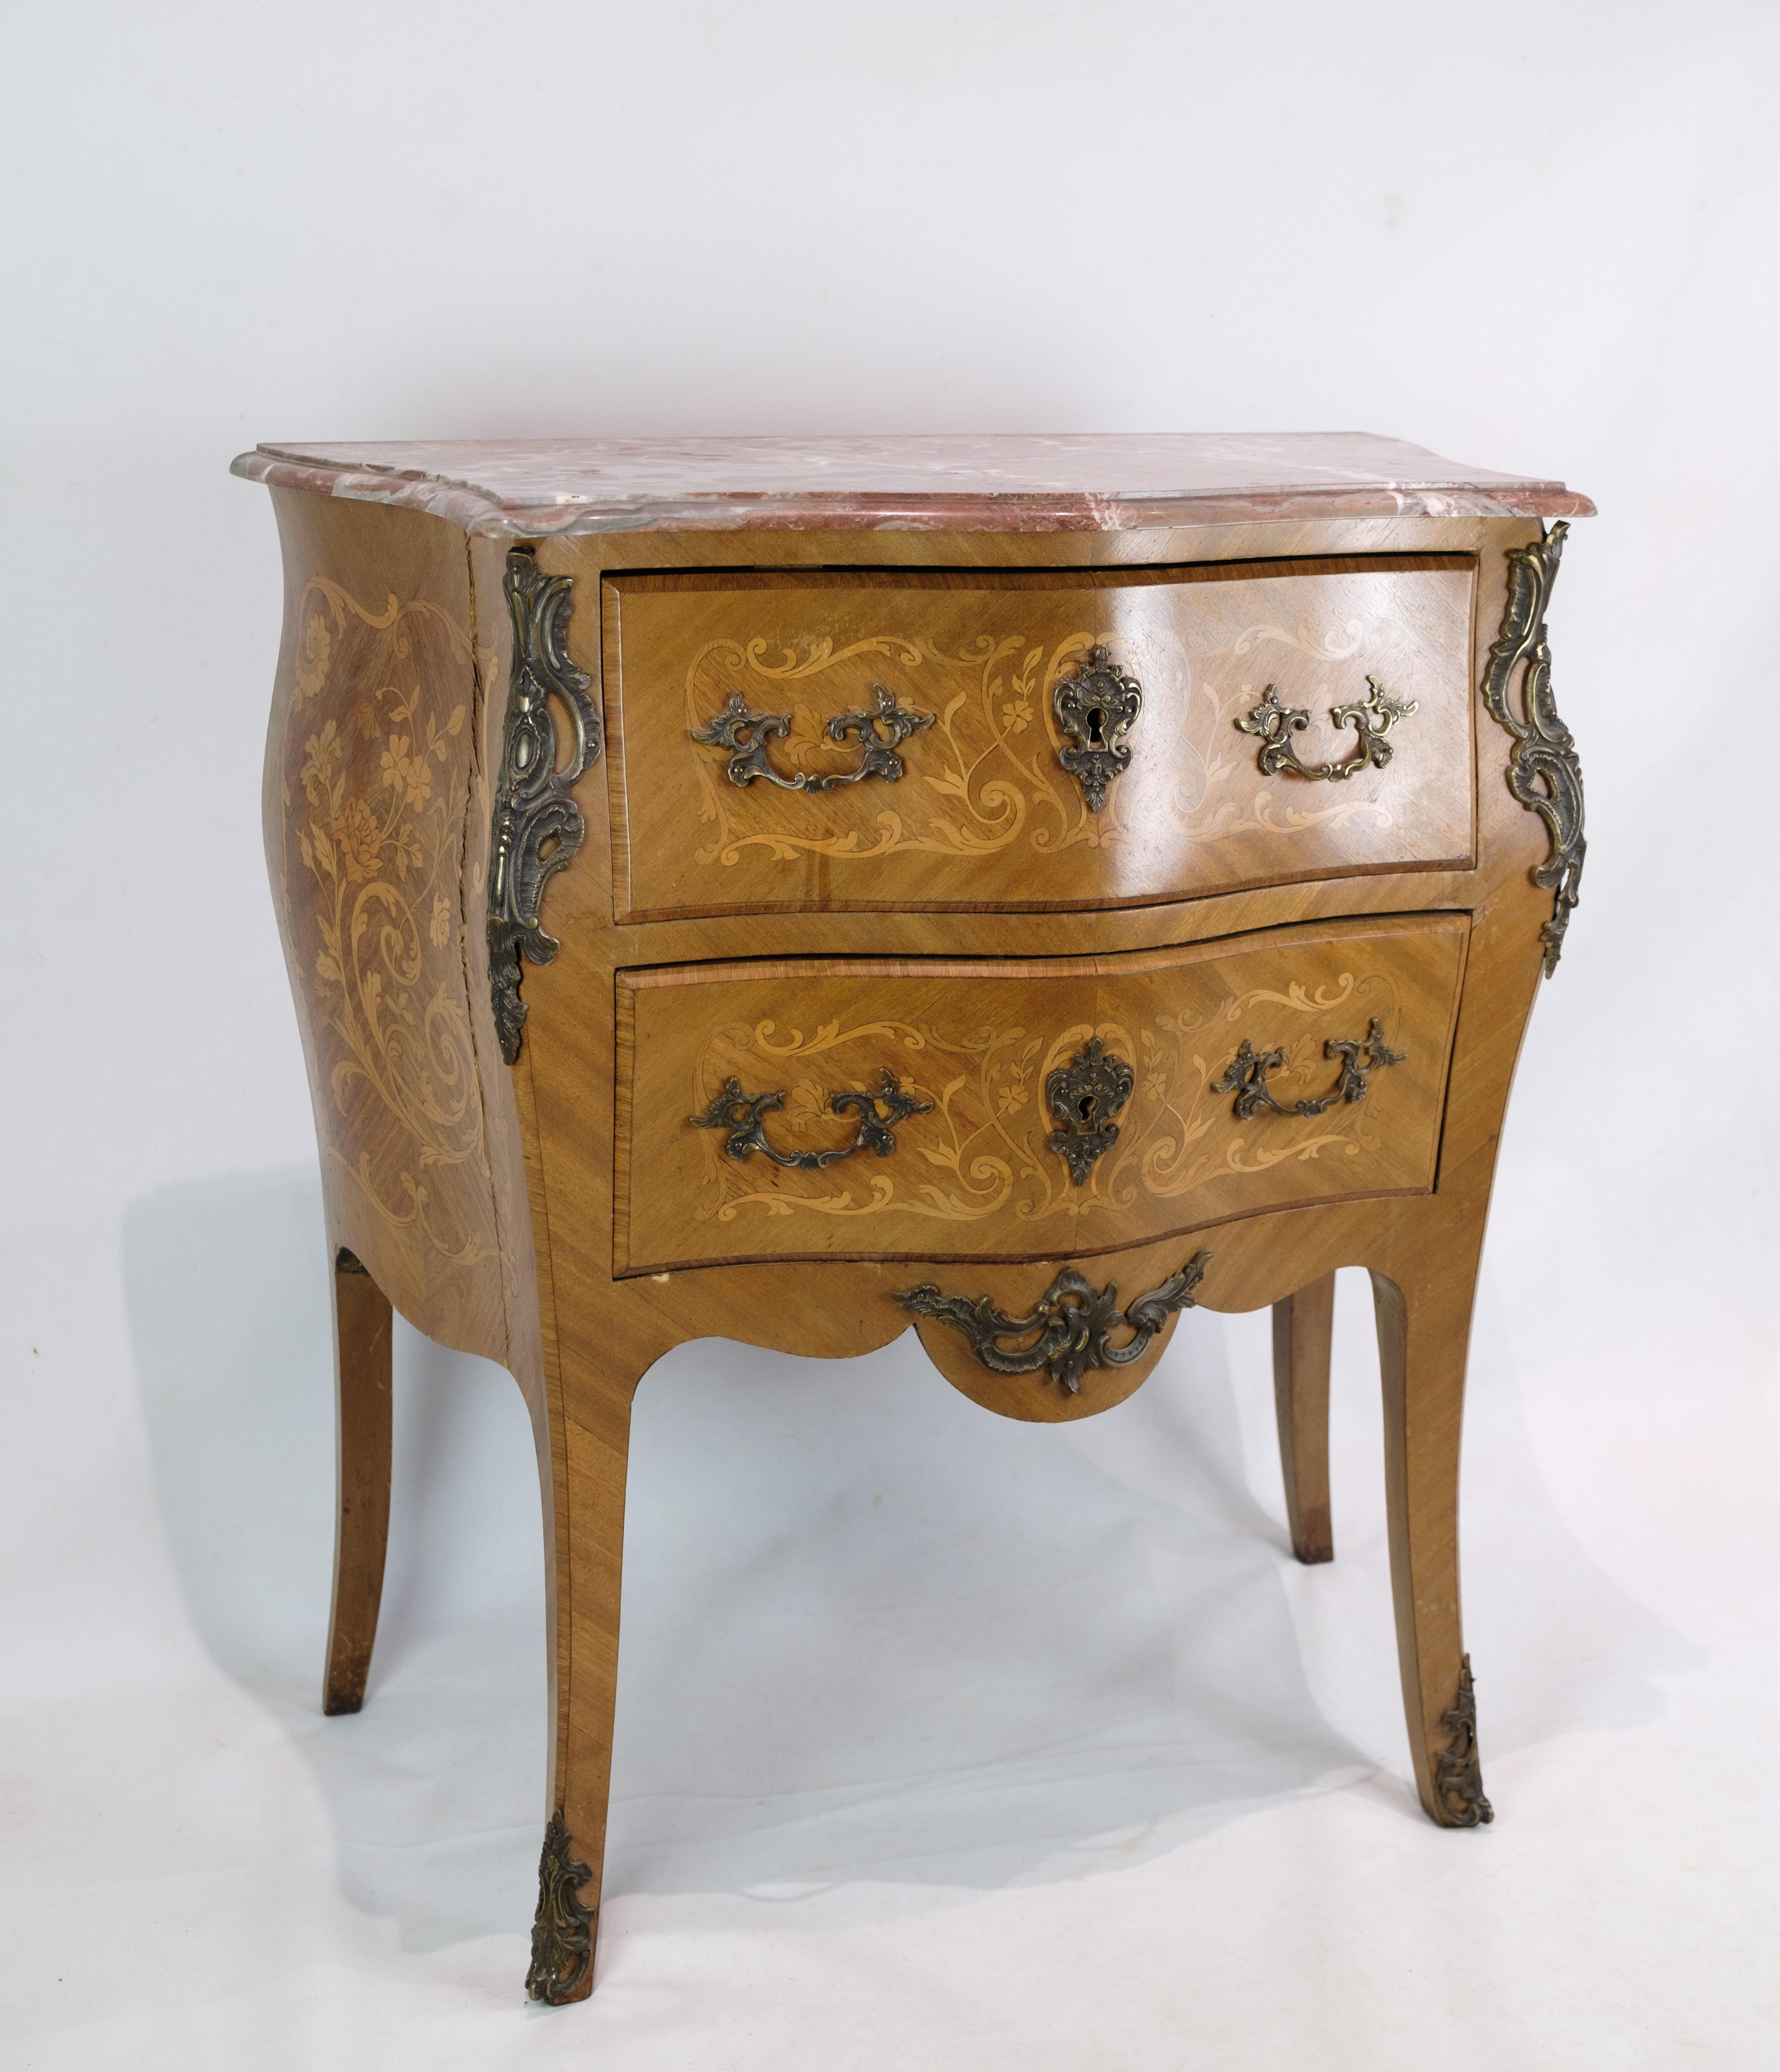 The Rococo chest of drawers you describe from the 1860s exudes the opulence and elegance characteristic of the Rococo style. Crafted from walnut wood, known for its warmth and depth, and crowned with a marble top, this chest of drawers makes an